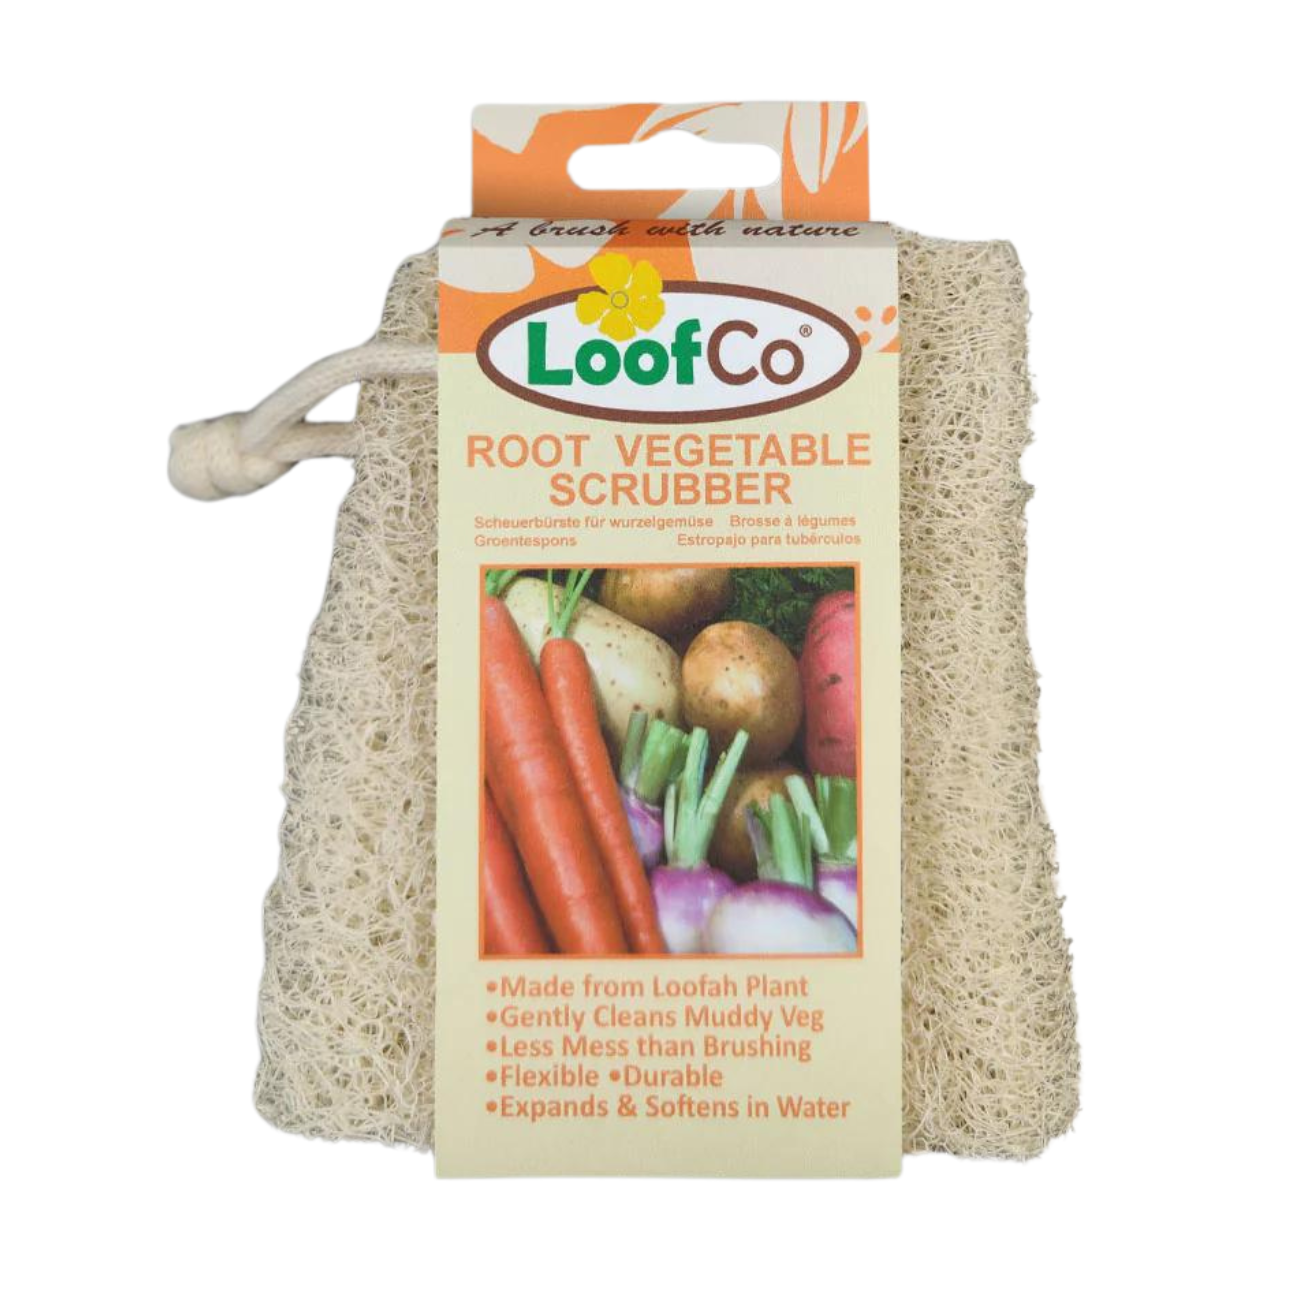 Root Vegetable Scrubber Biodegradable and Plastic-free